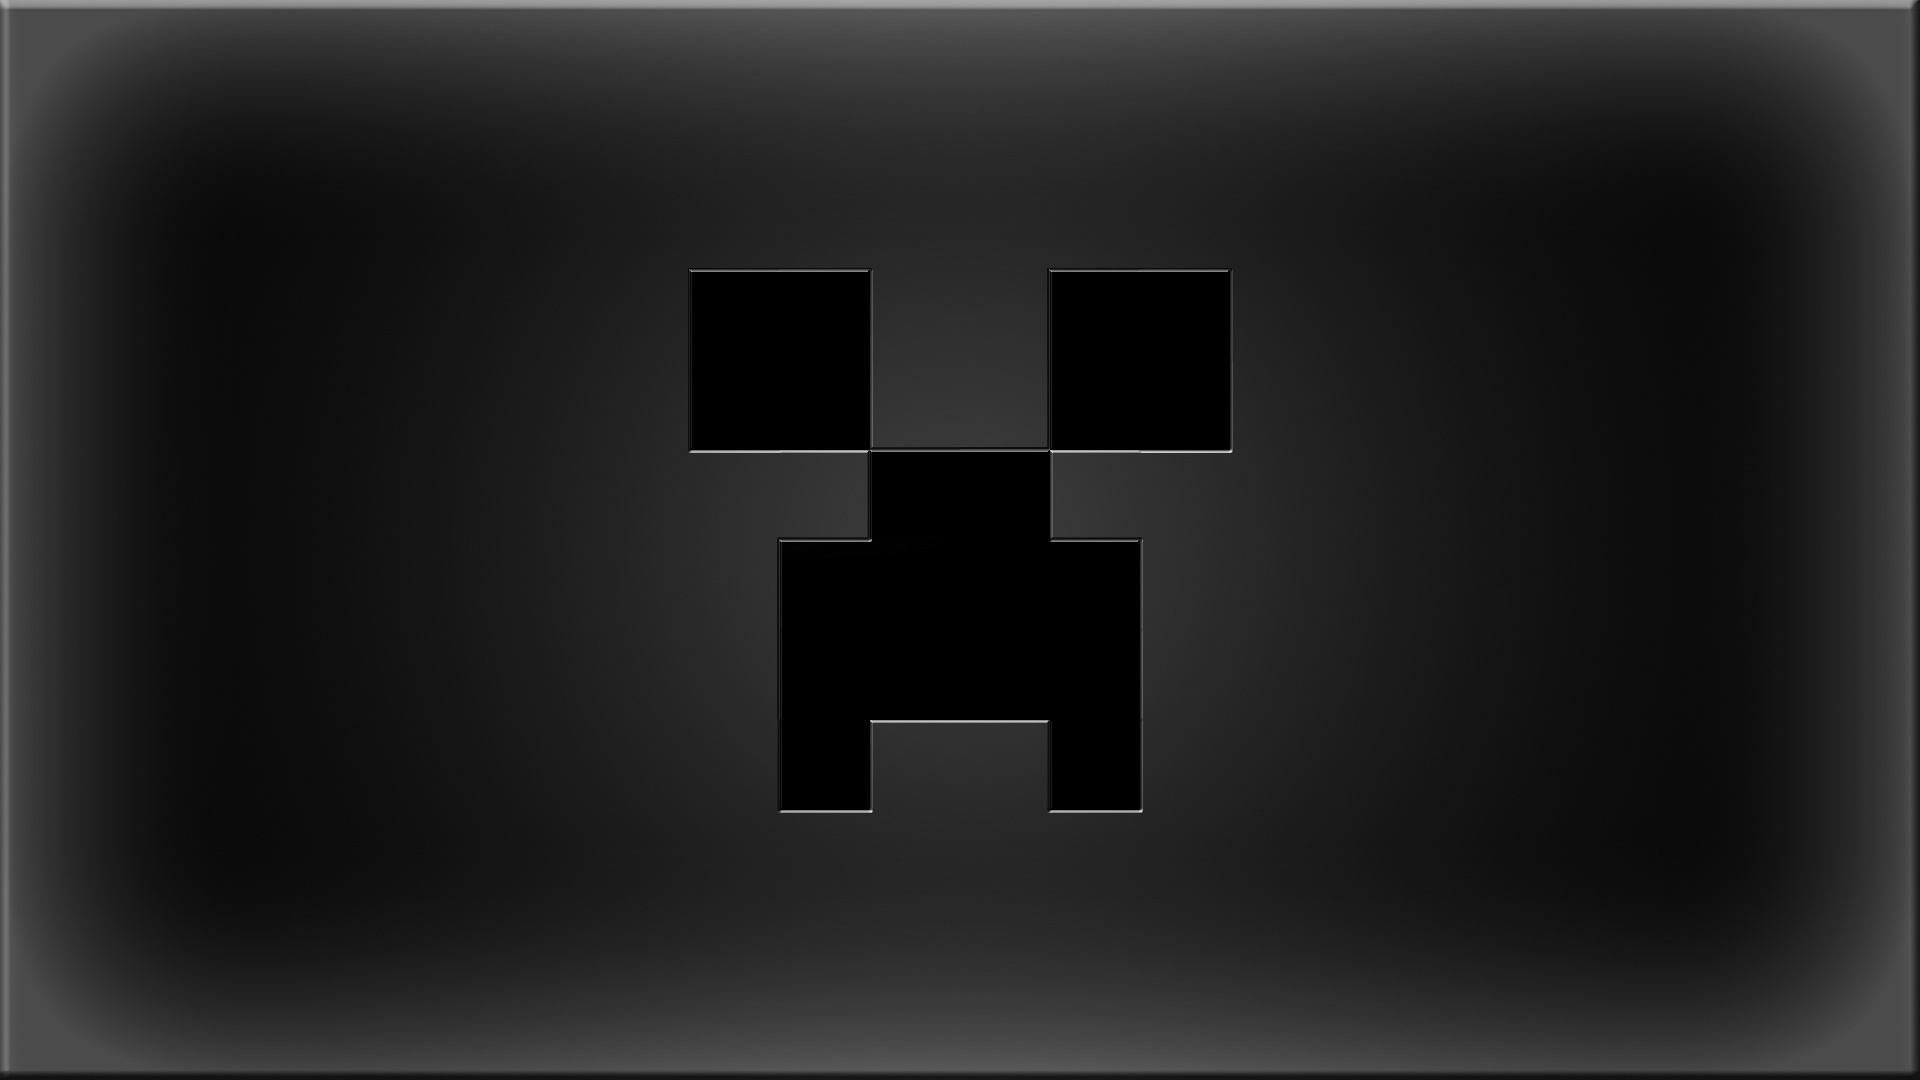 Free Download Creeper Minecraft Wallpaper 19x1080 Creeper Minecraft 19x1080 For Your Desktop Mobile Tablet Explore 47 Minecraft Official Wallpaper Awesome Minecraft Wallpaper Make Your Own Minecraft Wallpaper Minecraft Wallpaper